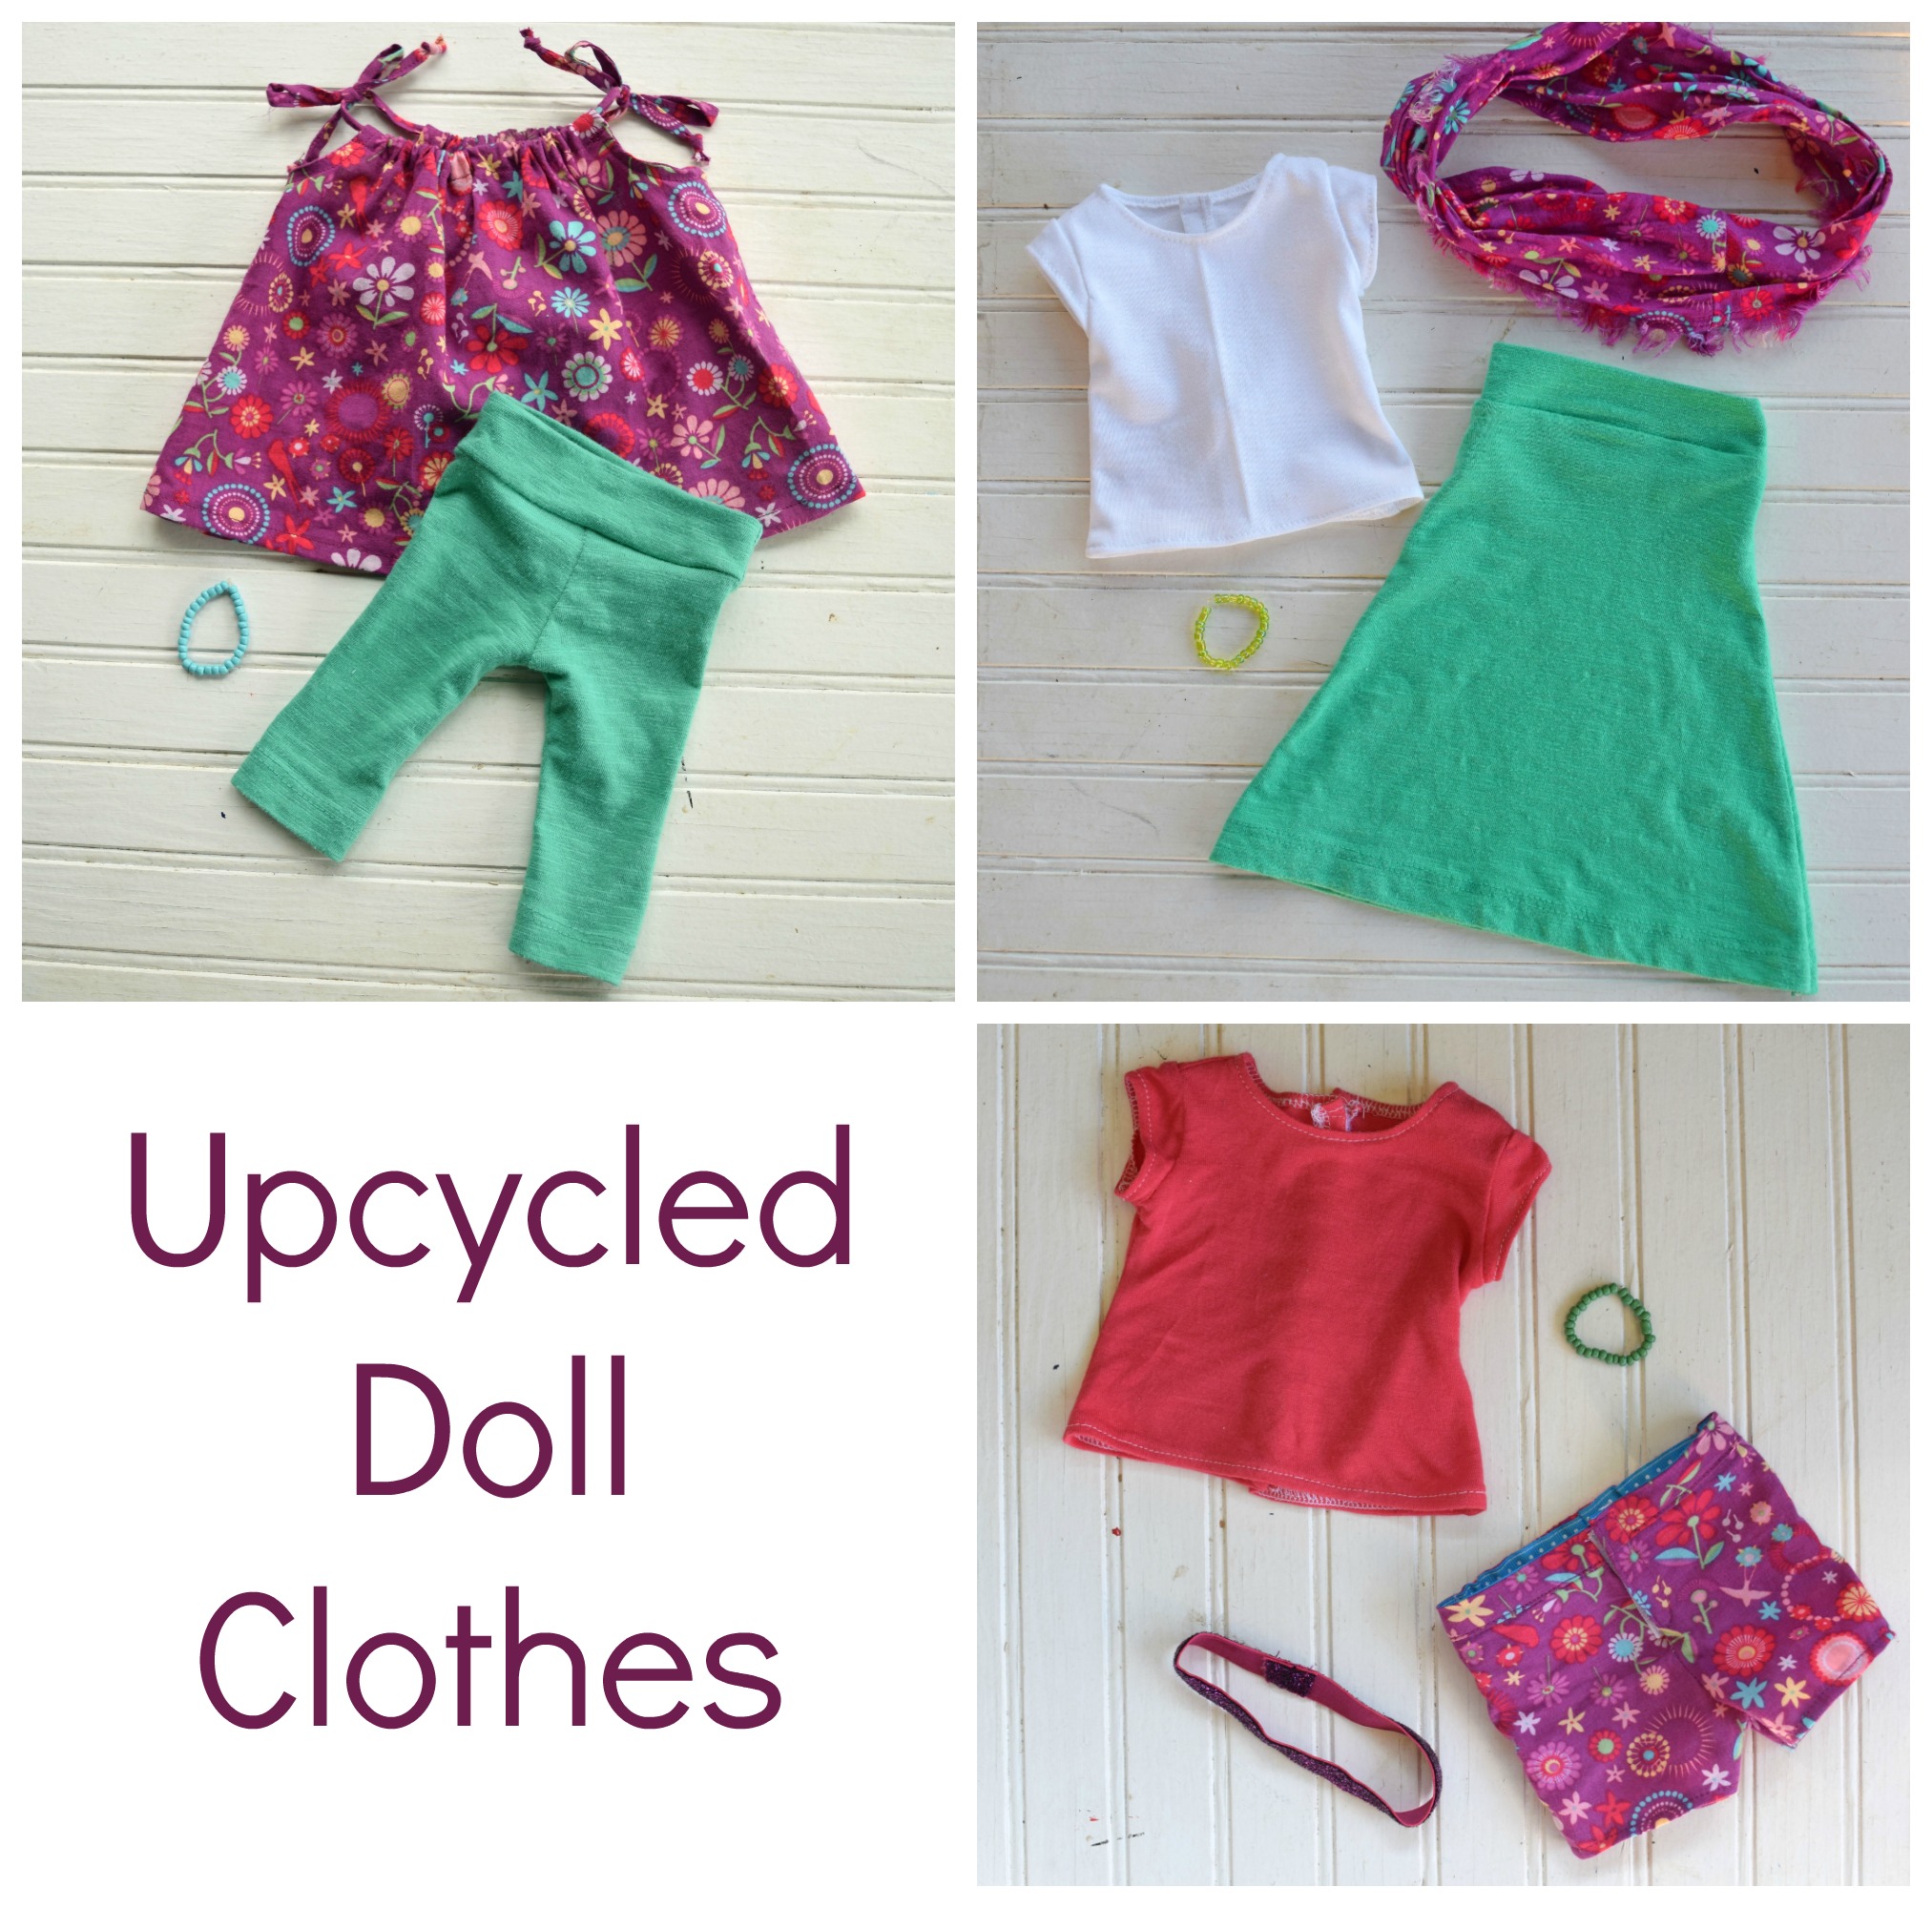 Upcycled Doll Clothes